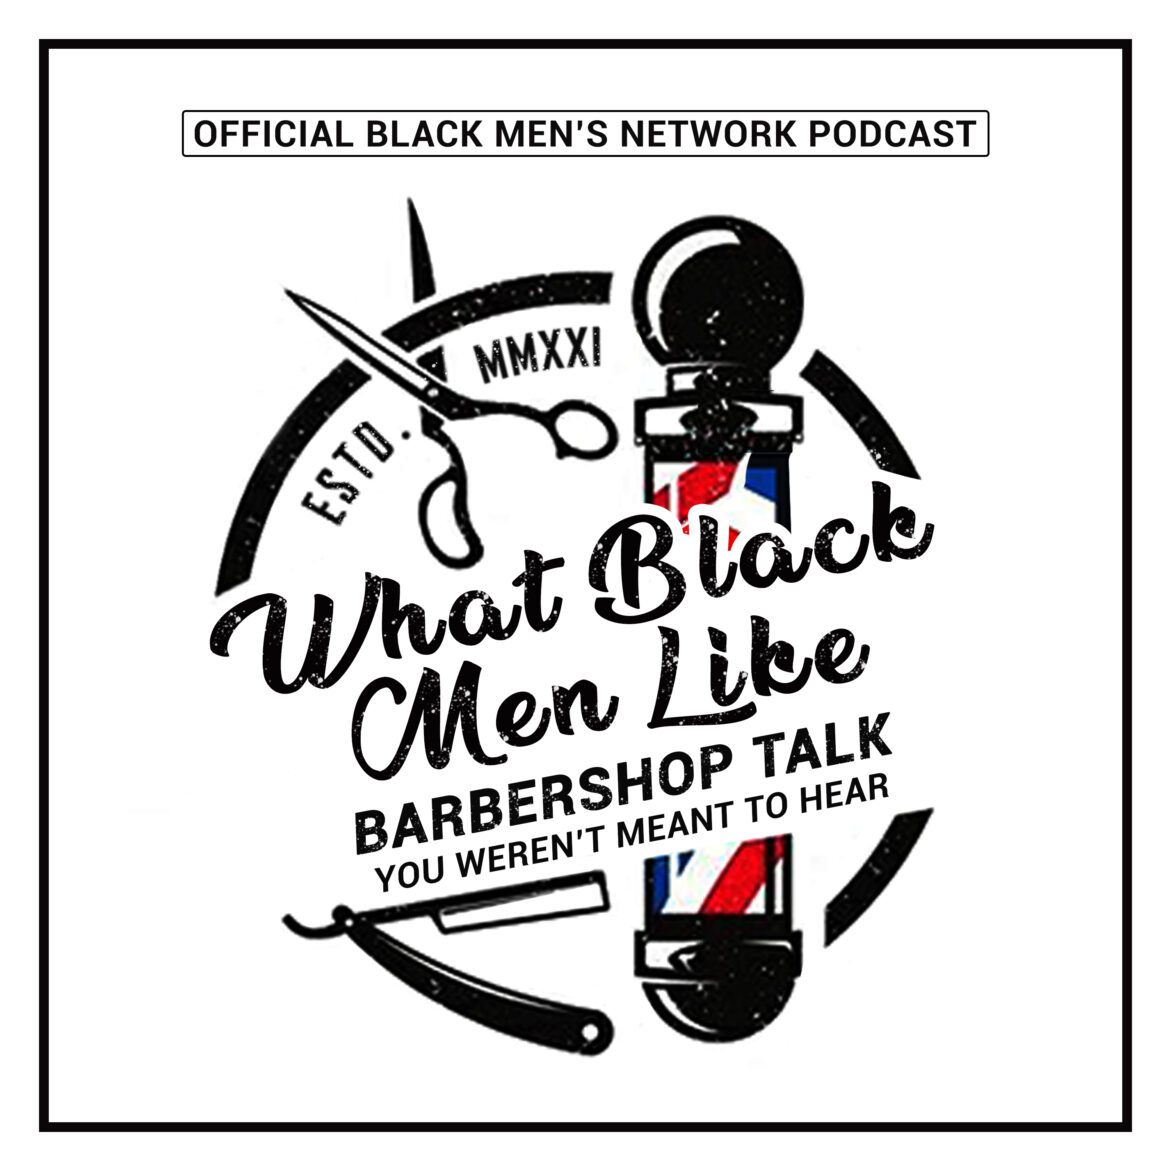 Black Podcasting - Interview: Hookdiggy